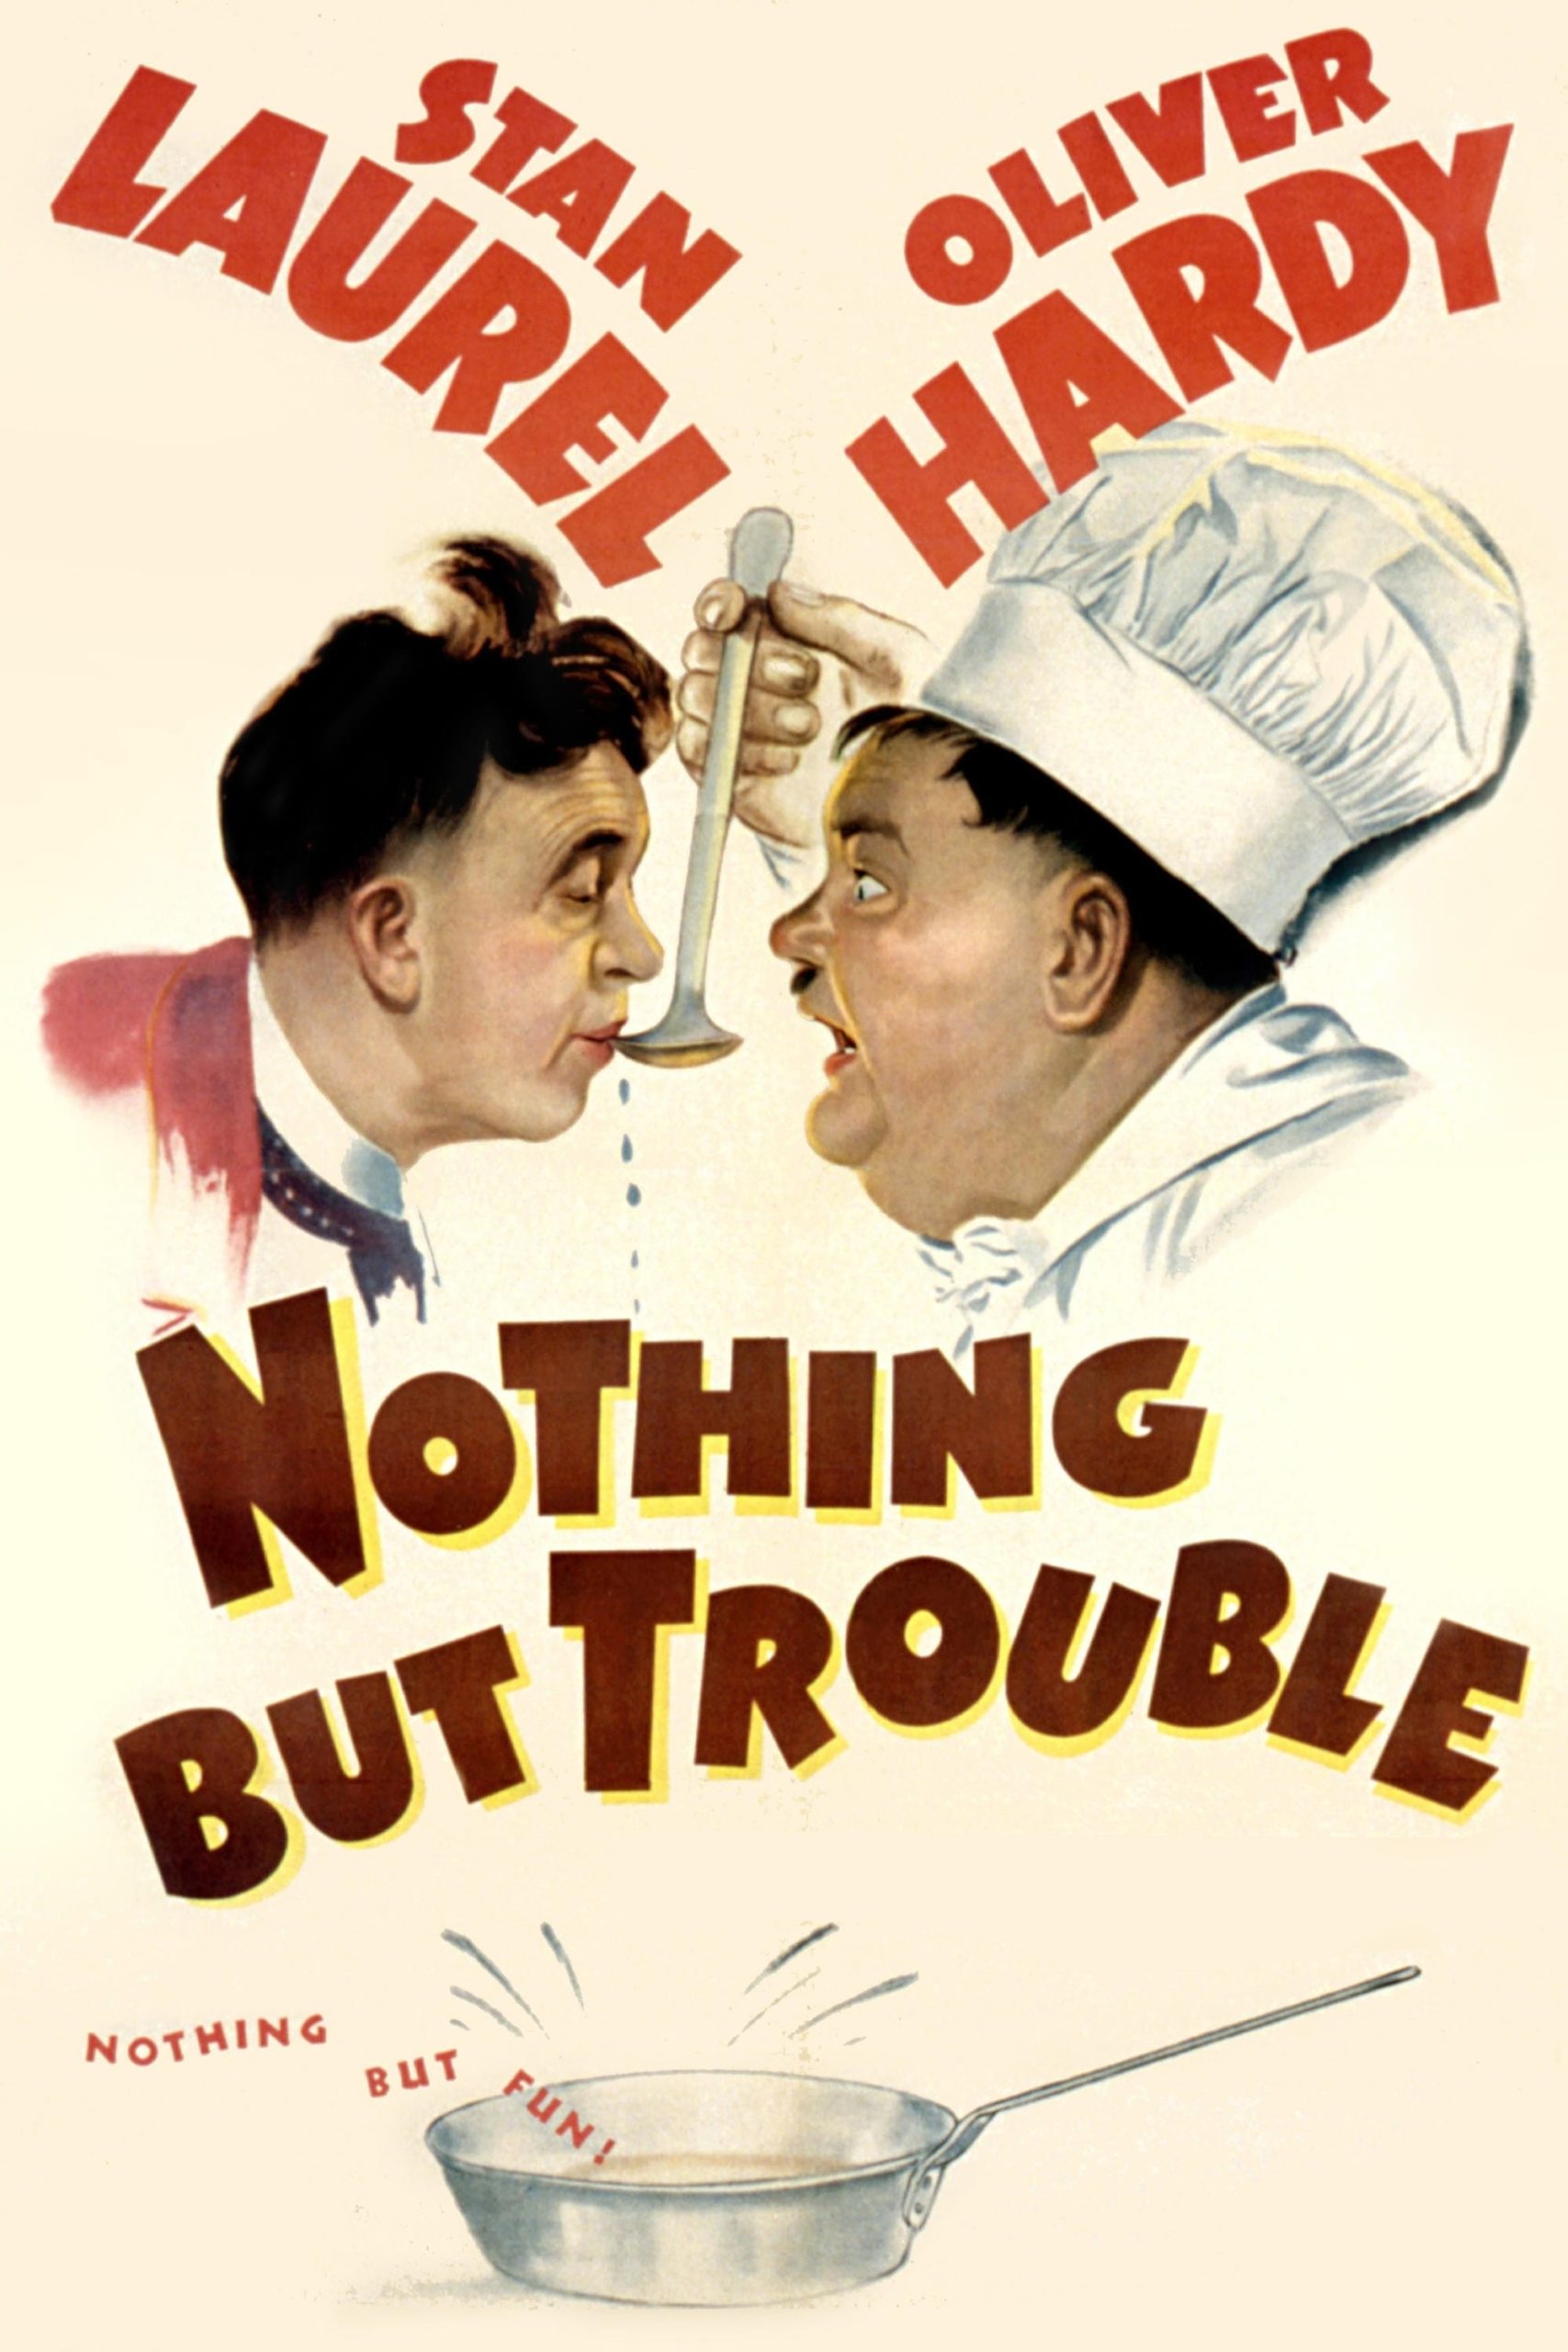 Poster for the movie "Nothing but Trouble"